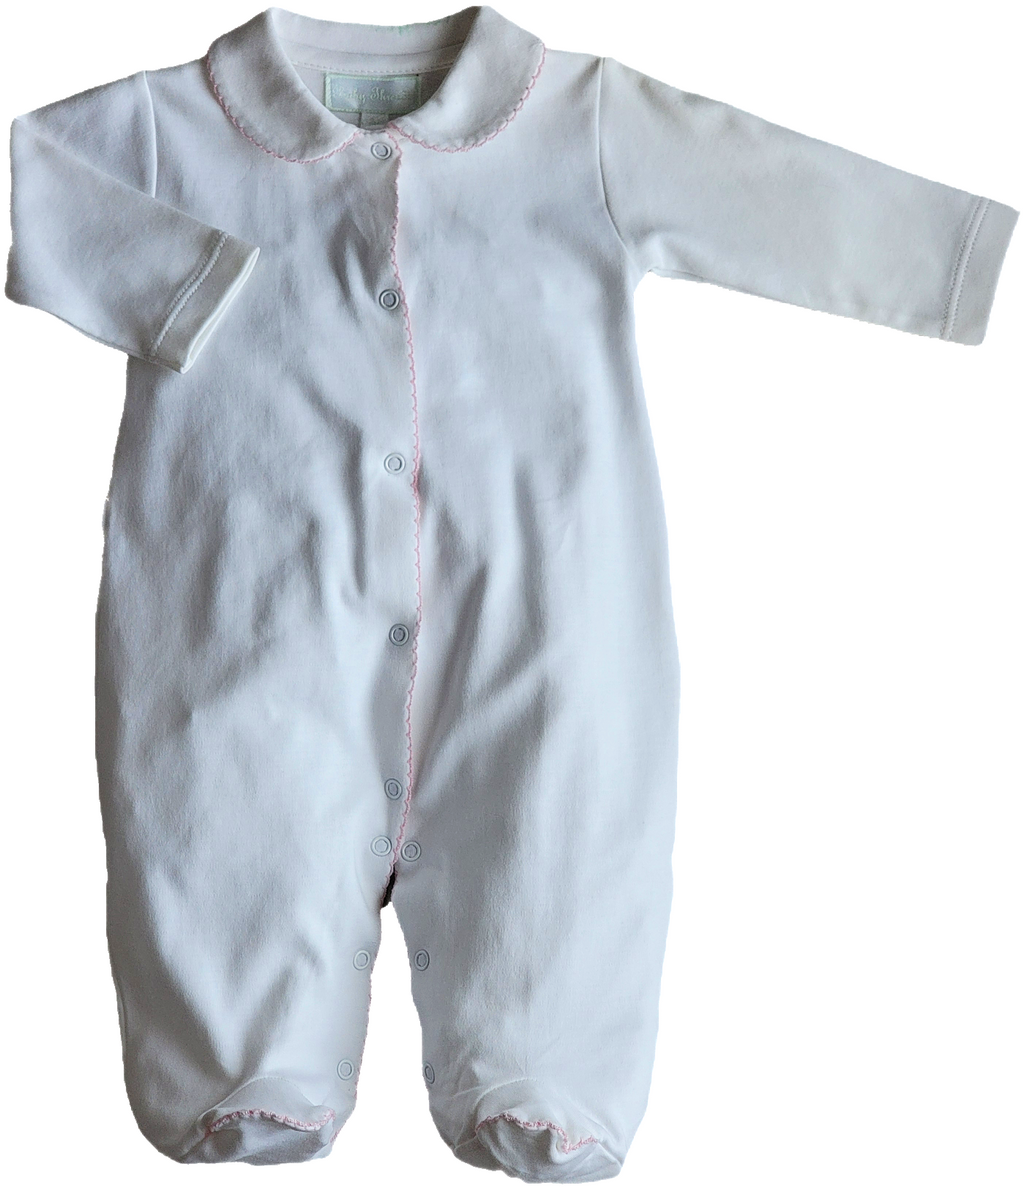 Baby Girl's White Footie with Pink Trim - Little Threads Inc. Children's Clothing